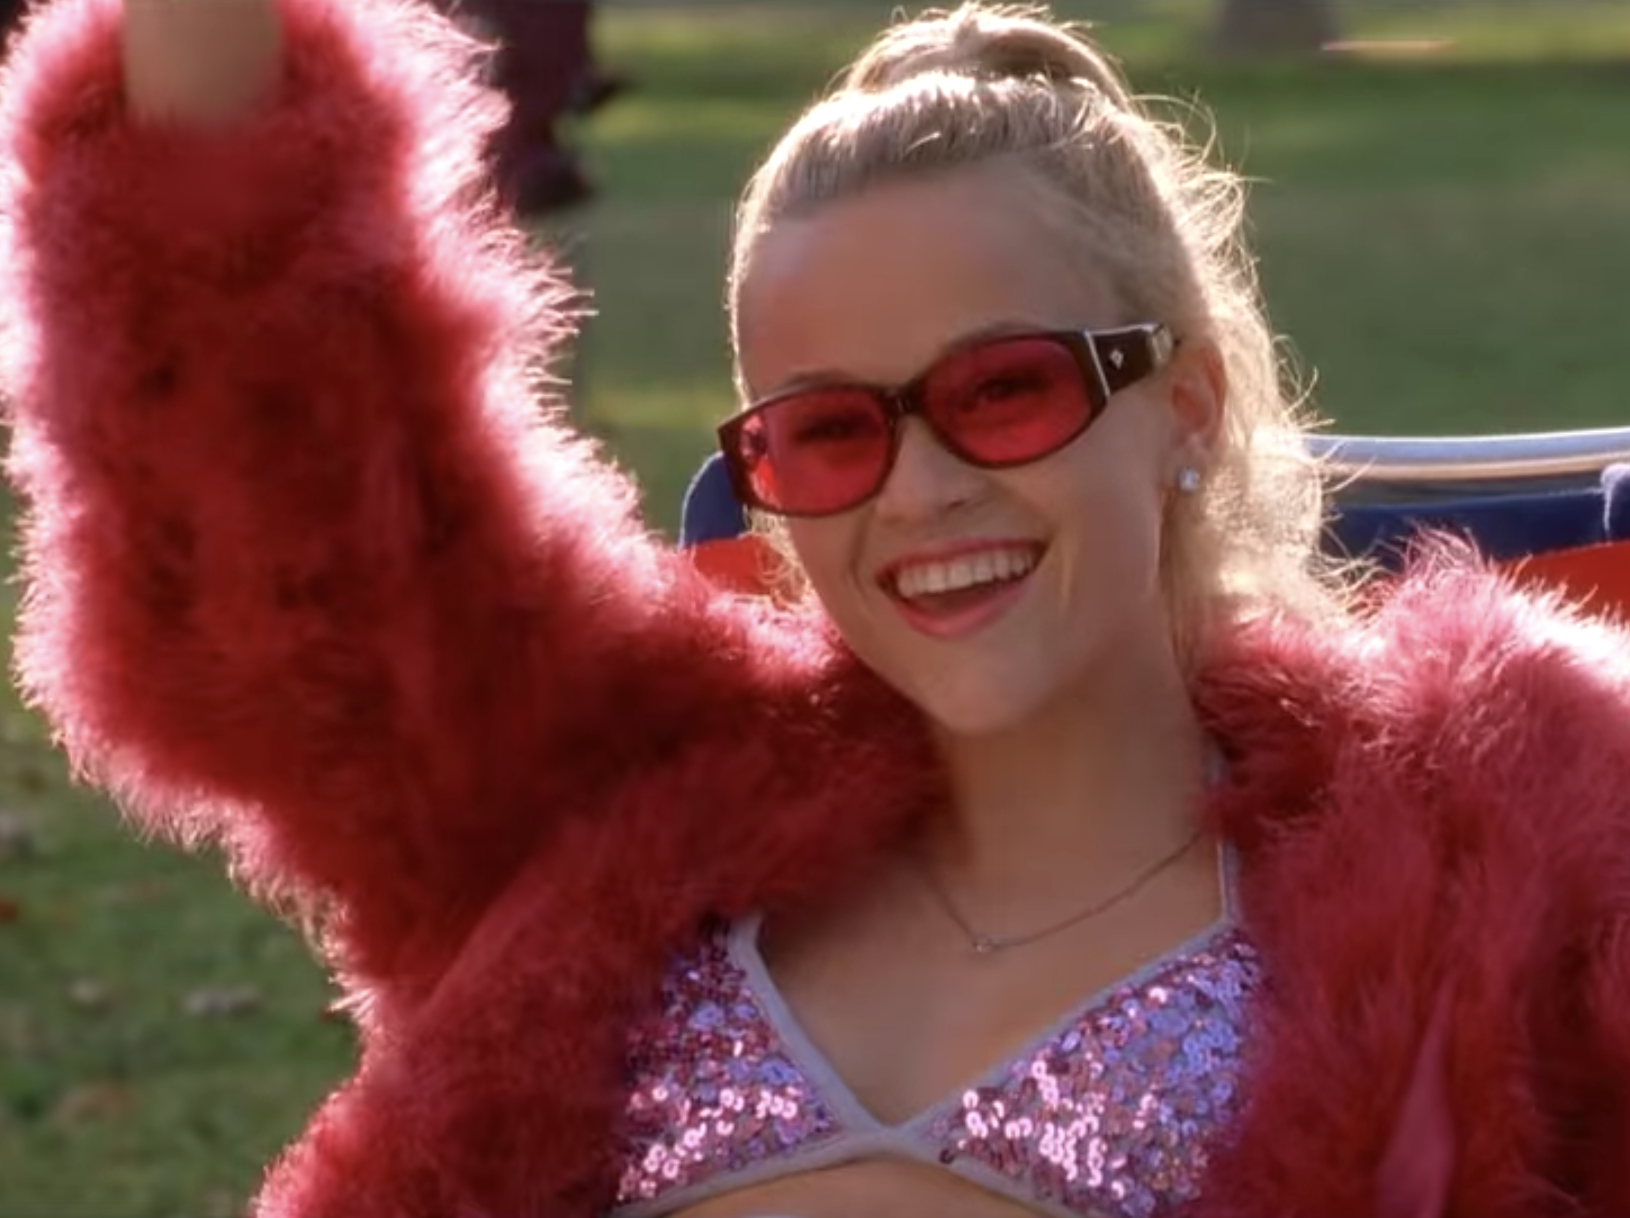 Reese Witherspoon wearing a pink outfit and holding a drink in "Legally Blonde."